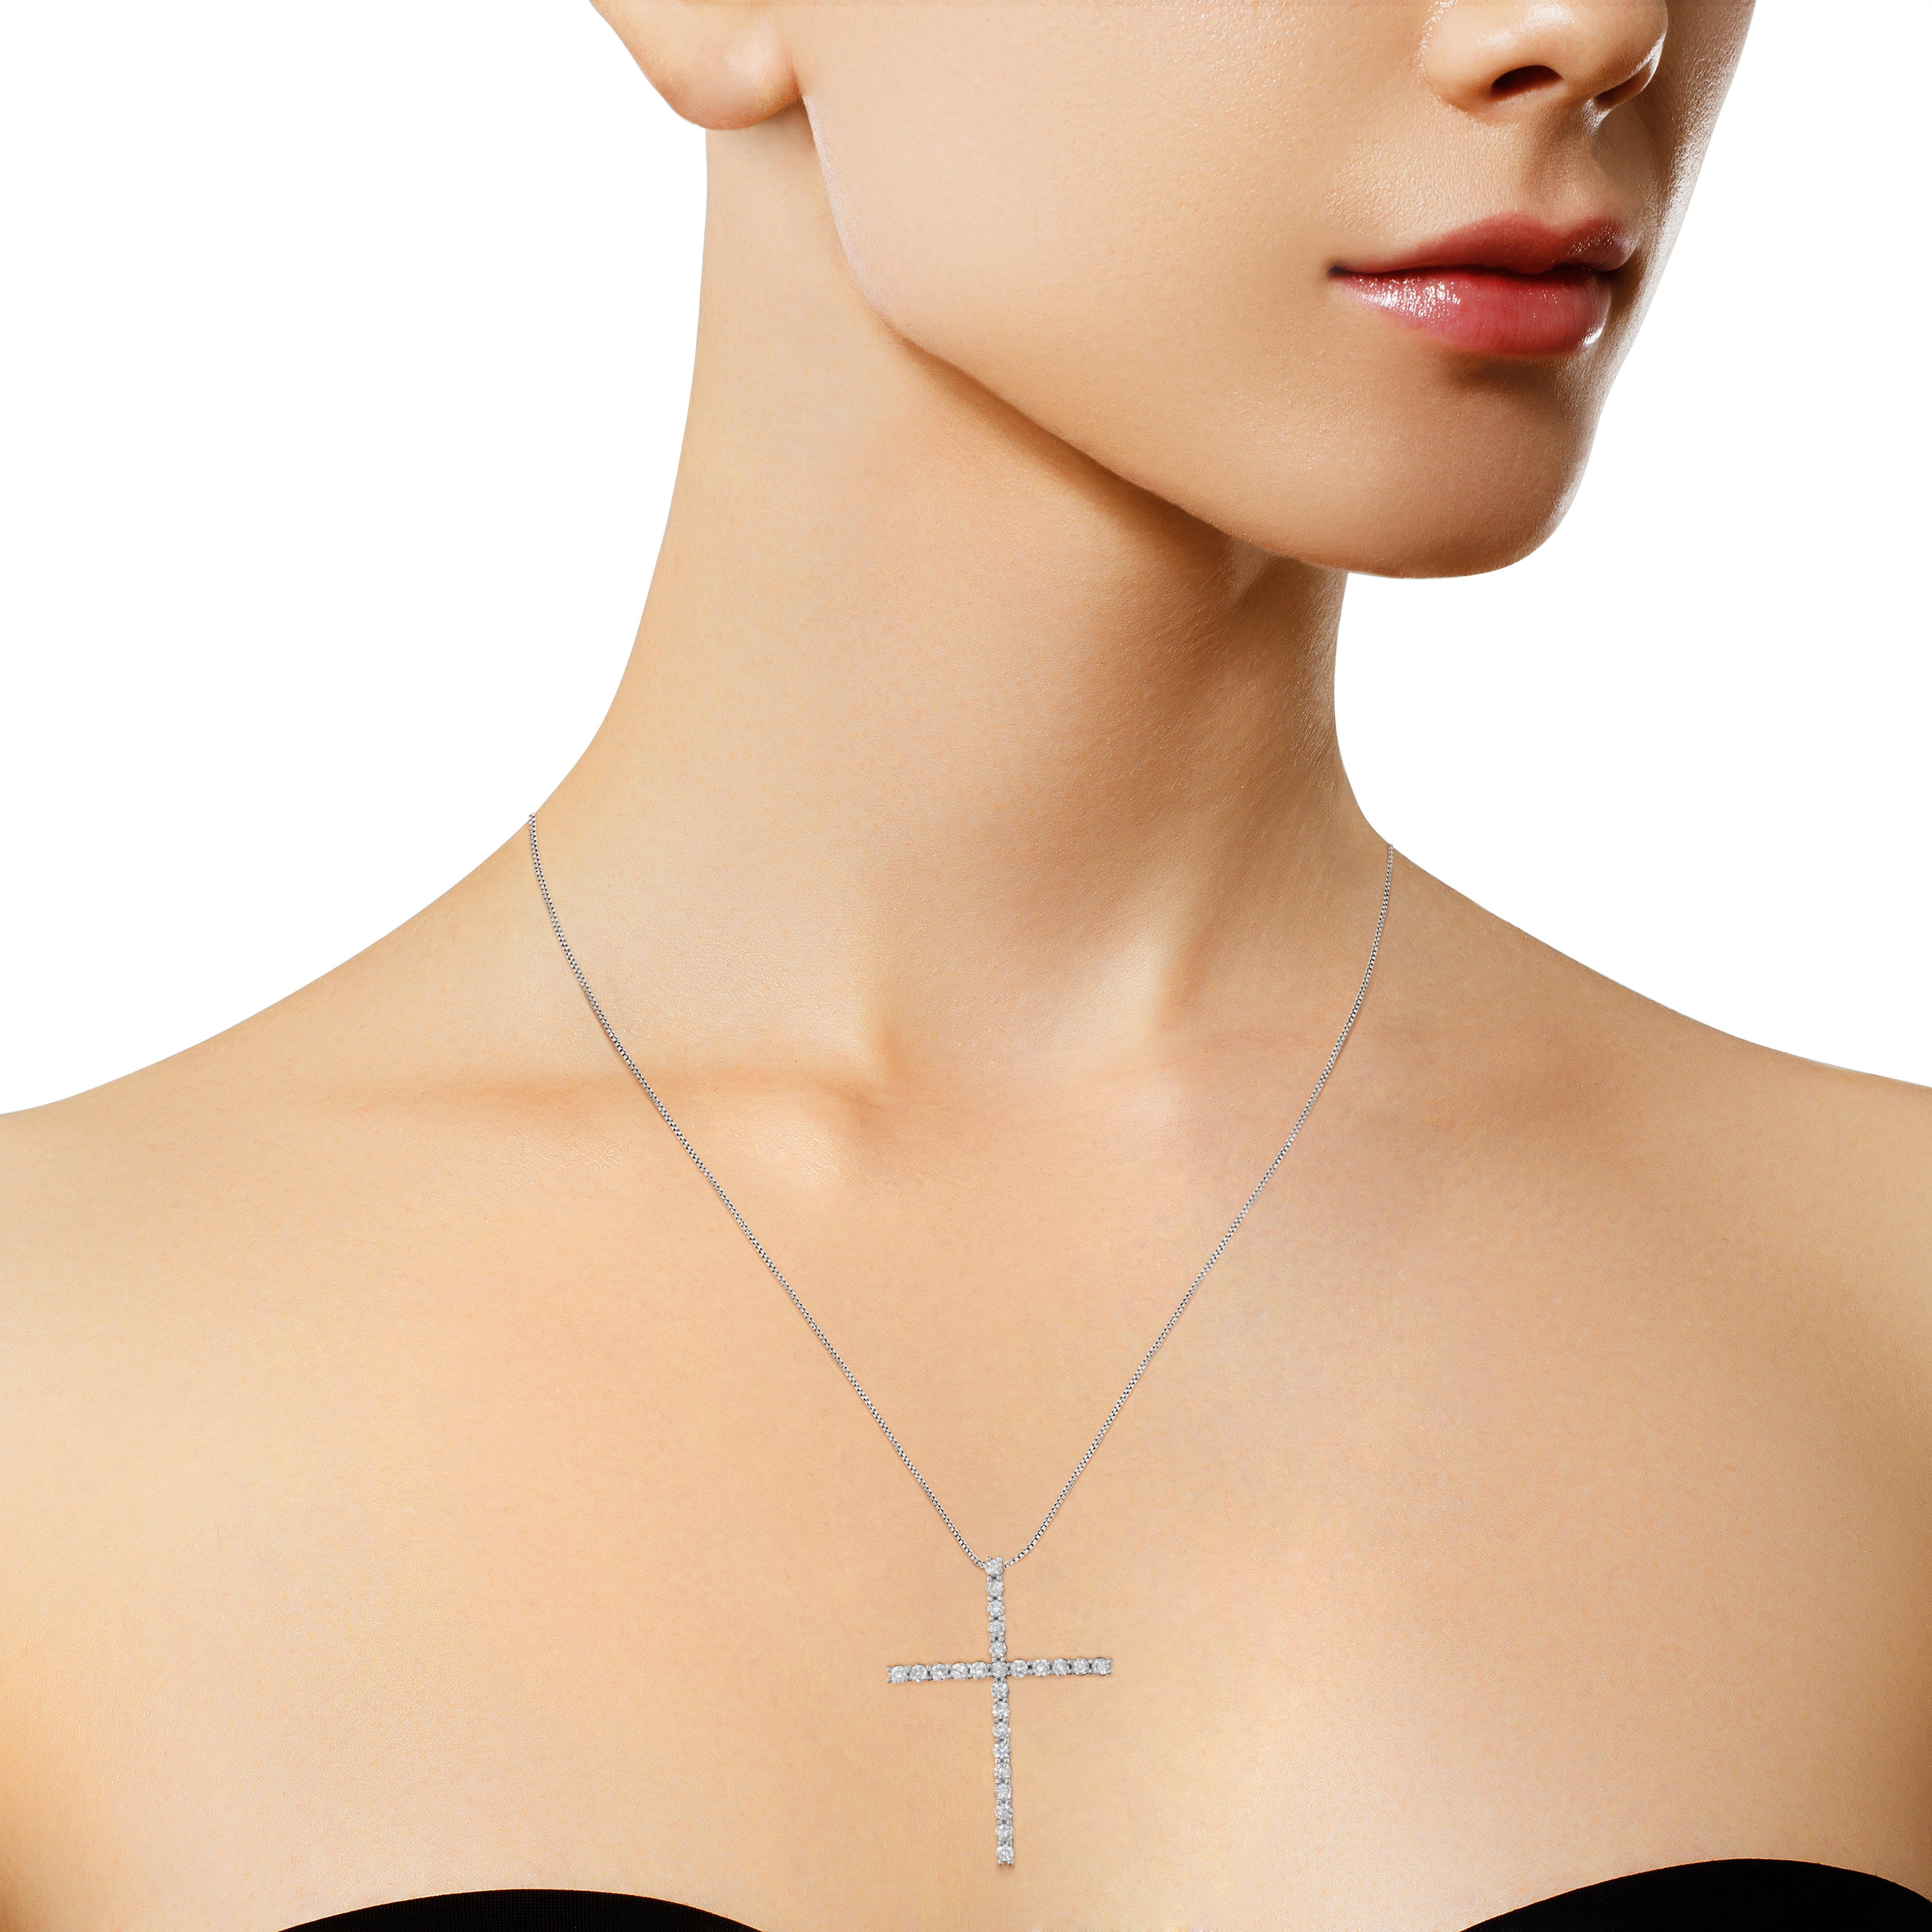 Women's .925 Sterling Silver 2 1/2 cttw Diamond Cross Pendant Necklace (H-I, I2-I3) For Sale